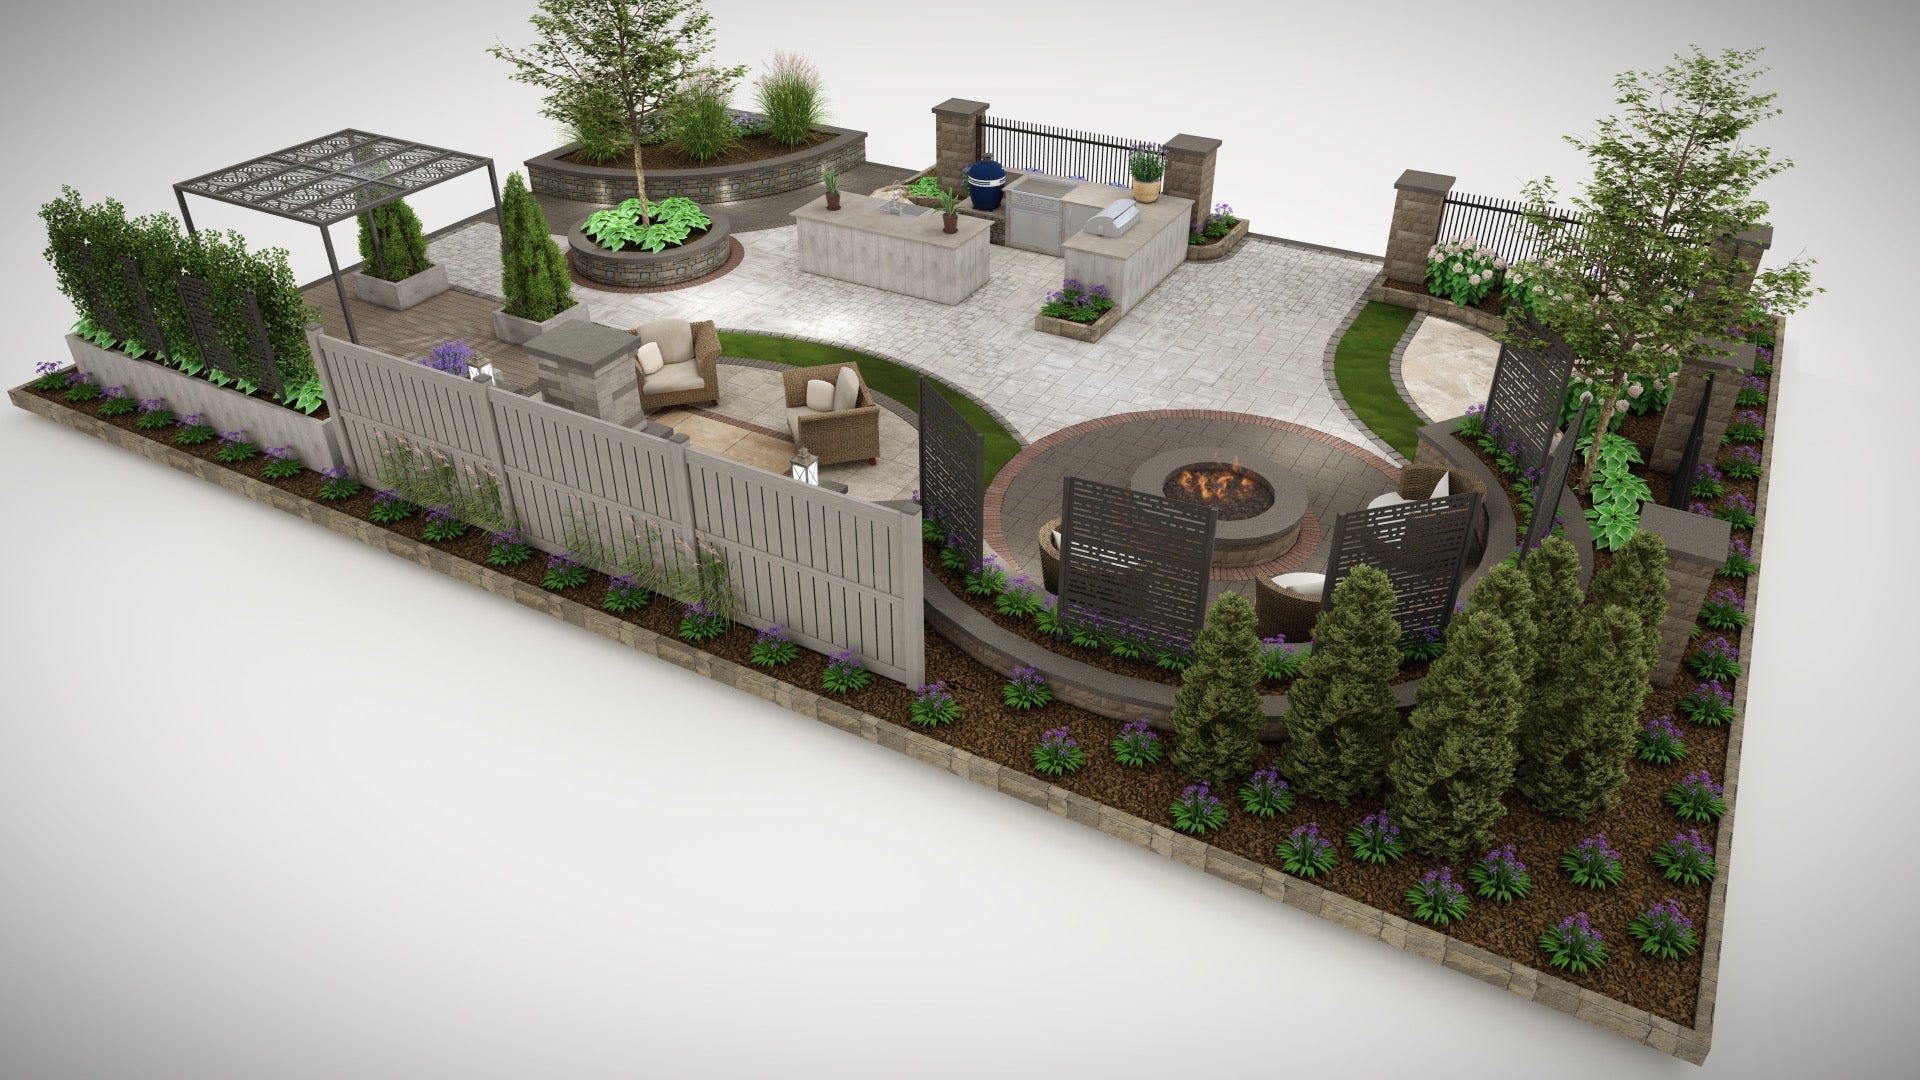 Renderings for Belgard Booth, Philly Flower Show